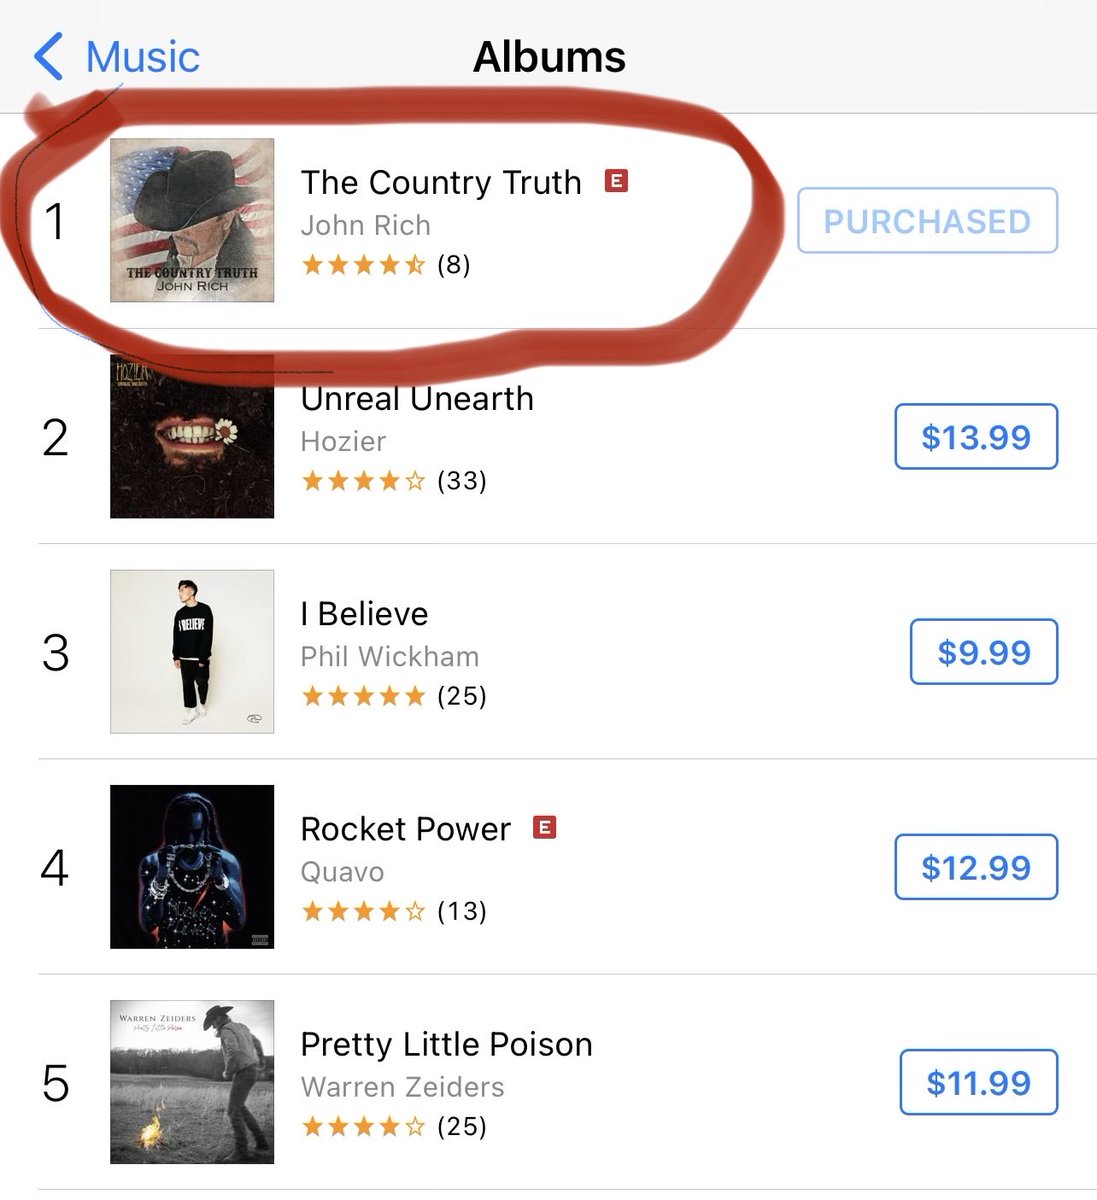 Thank you for making my new record #TheCountryTruth the #1 selling album in all genres! Much appreciated!